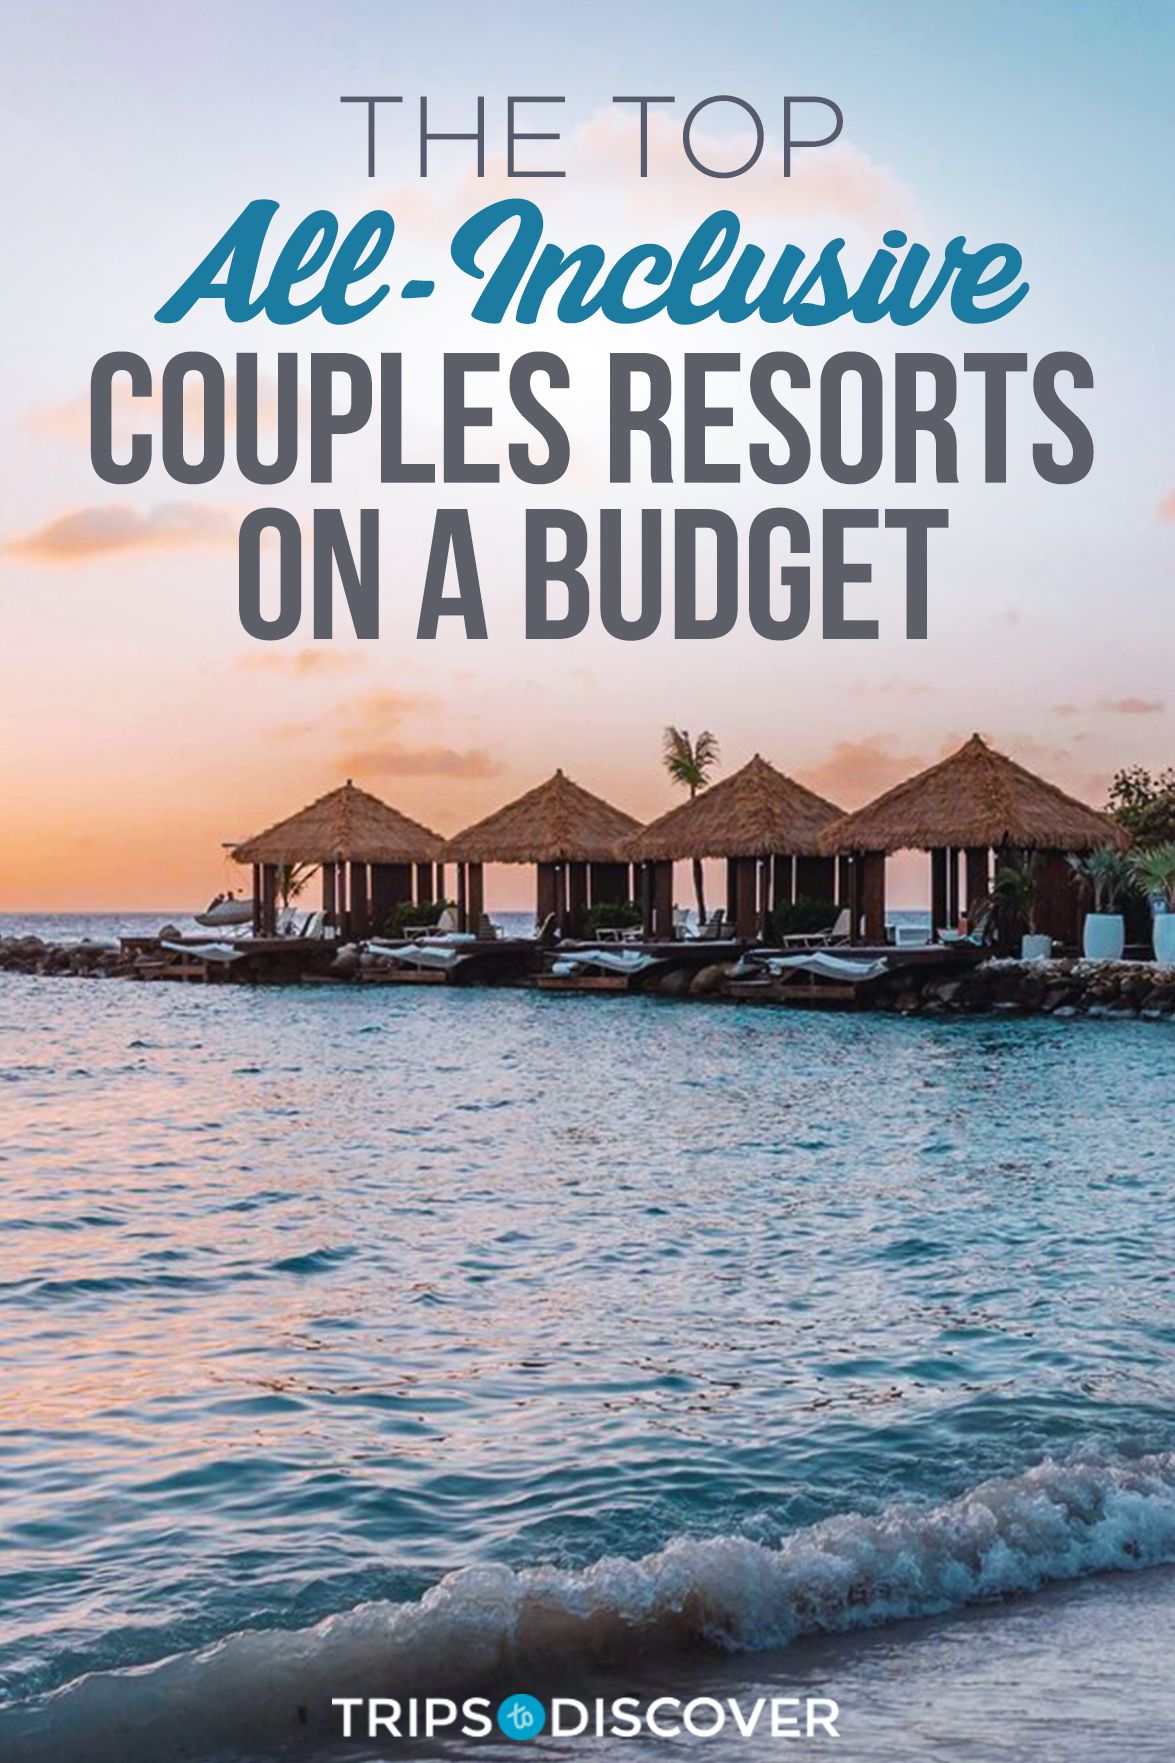 17 All-Inclusive Resorts for Couples on a Budget